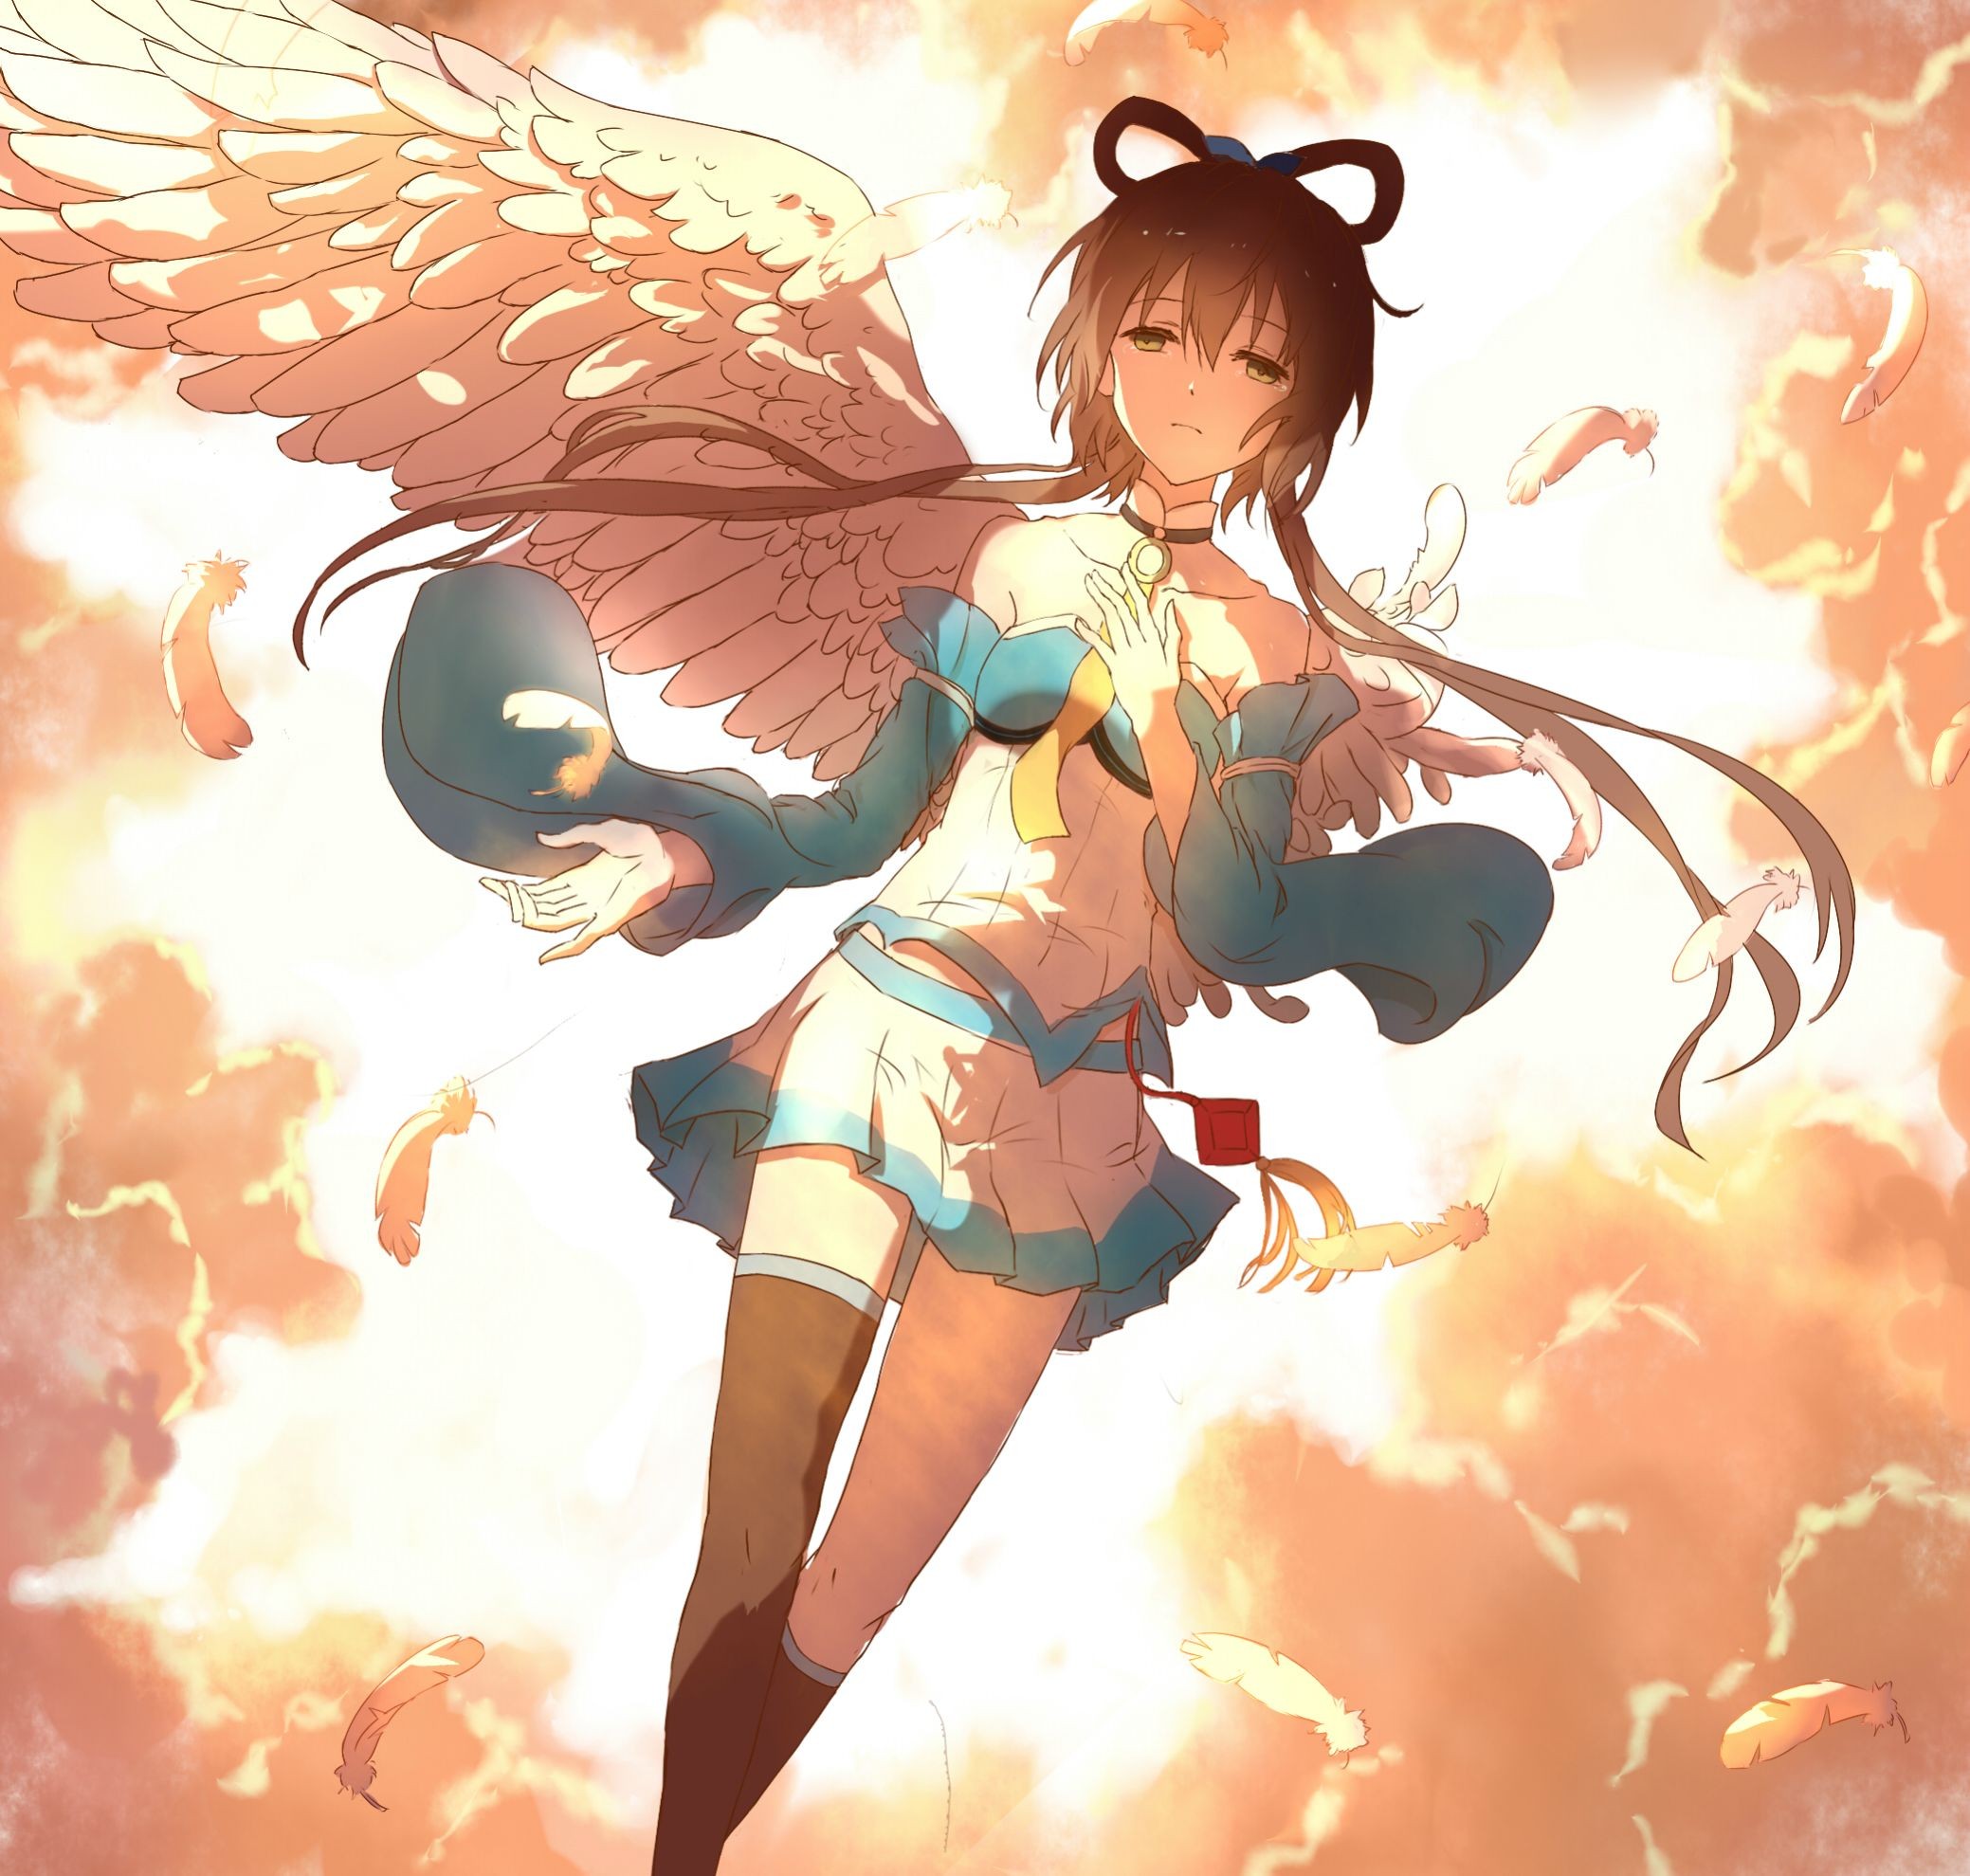 Anime 2078x1979 anime girls Vocaloid wings Luo Tianyi (vocaloid) anime fantasy art fantasy girl sky sunlight clouds feathers